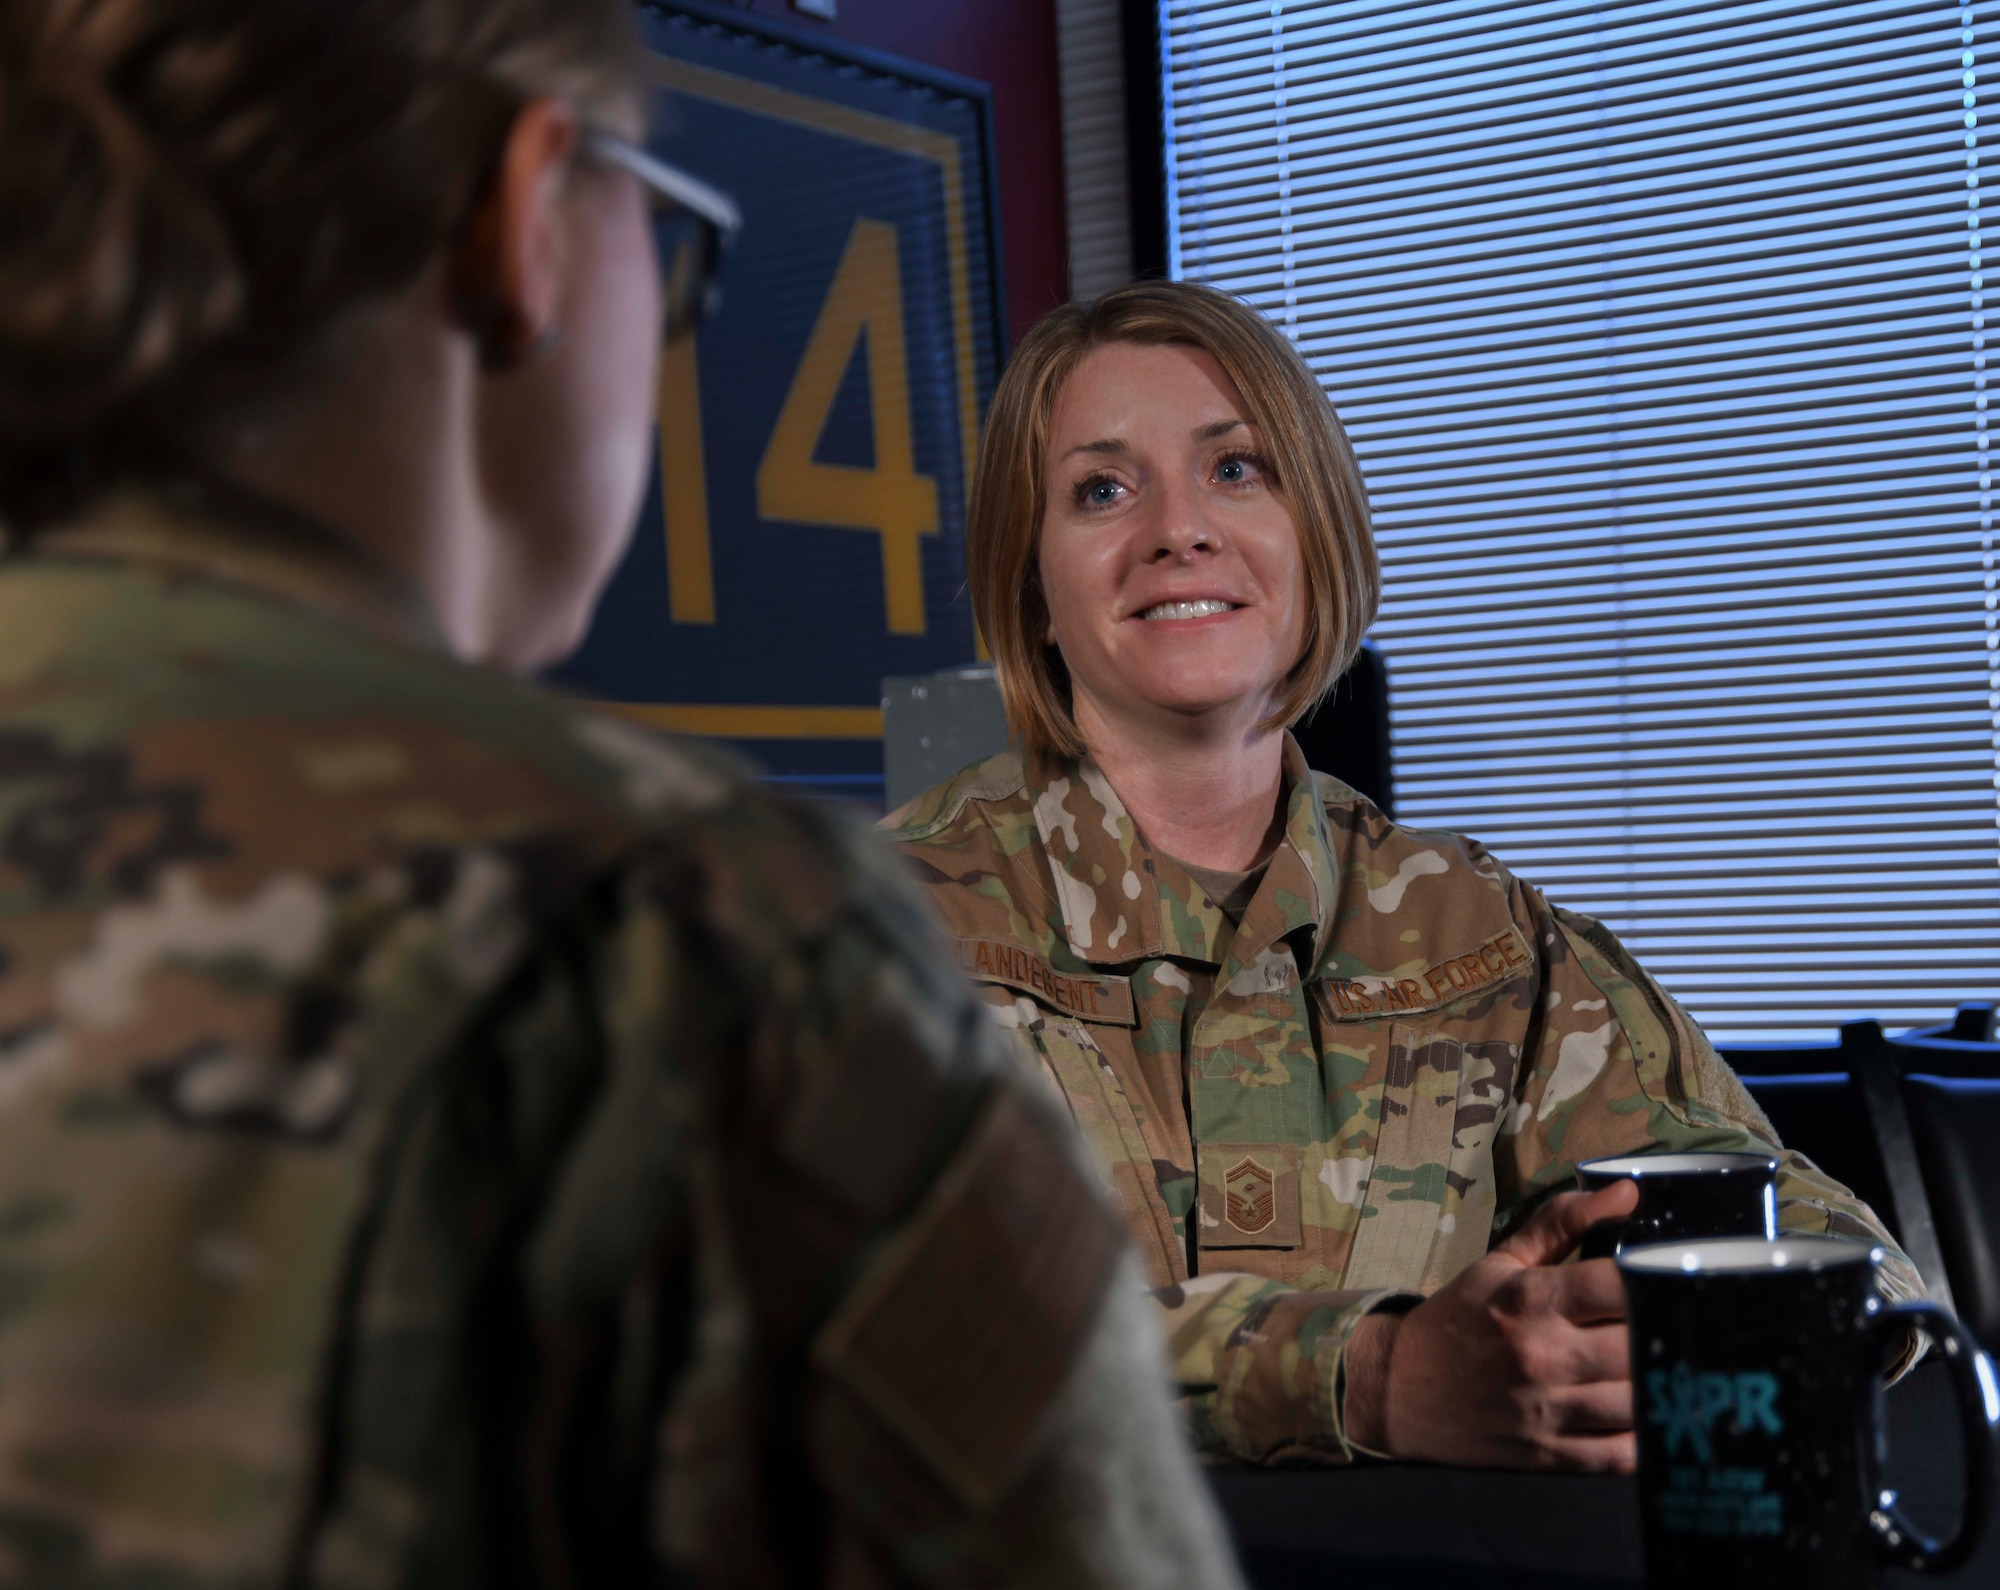 U.S. Air Force 1st Sgt. Rachel L. Landegent, the wing staff and operations group first sergeant with the 161st Air Refueling Wing, Arizona Air National Guard, listens to an Airman during a mentoring session in Phoenix, Ariz., July 2, 2019. Landegent routinely conducts one-on-one mentoring with Airmen in support of their professional and personal development. (Air National Guard photo by Staff Sgt. Morgan R. Lipinski)